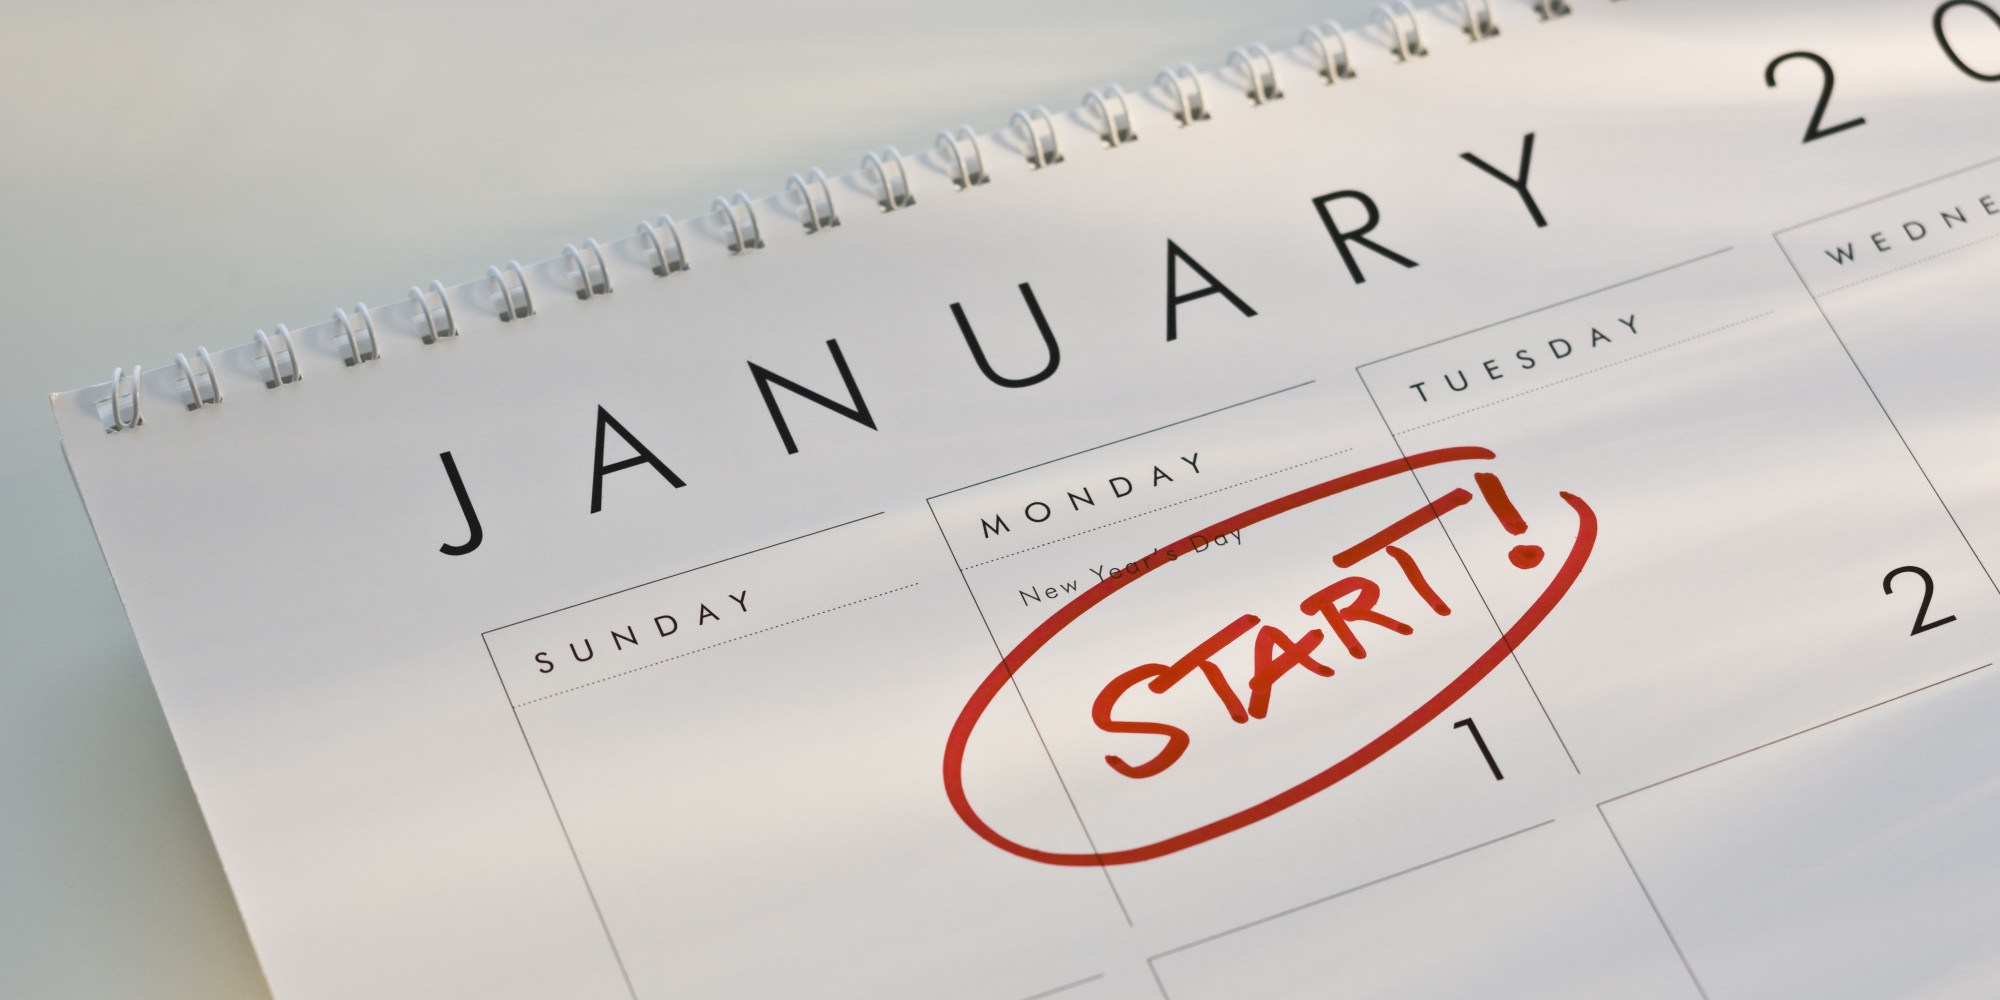 Make the best out of the set resolutions in the year